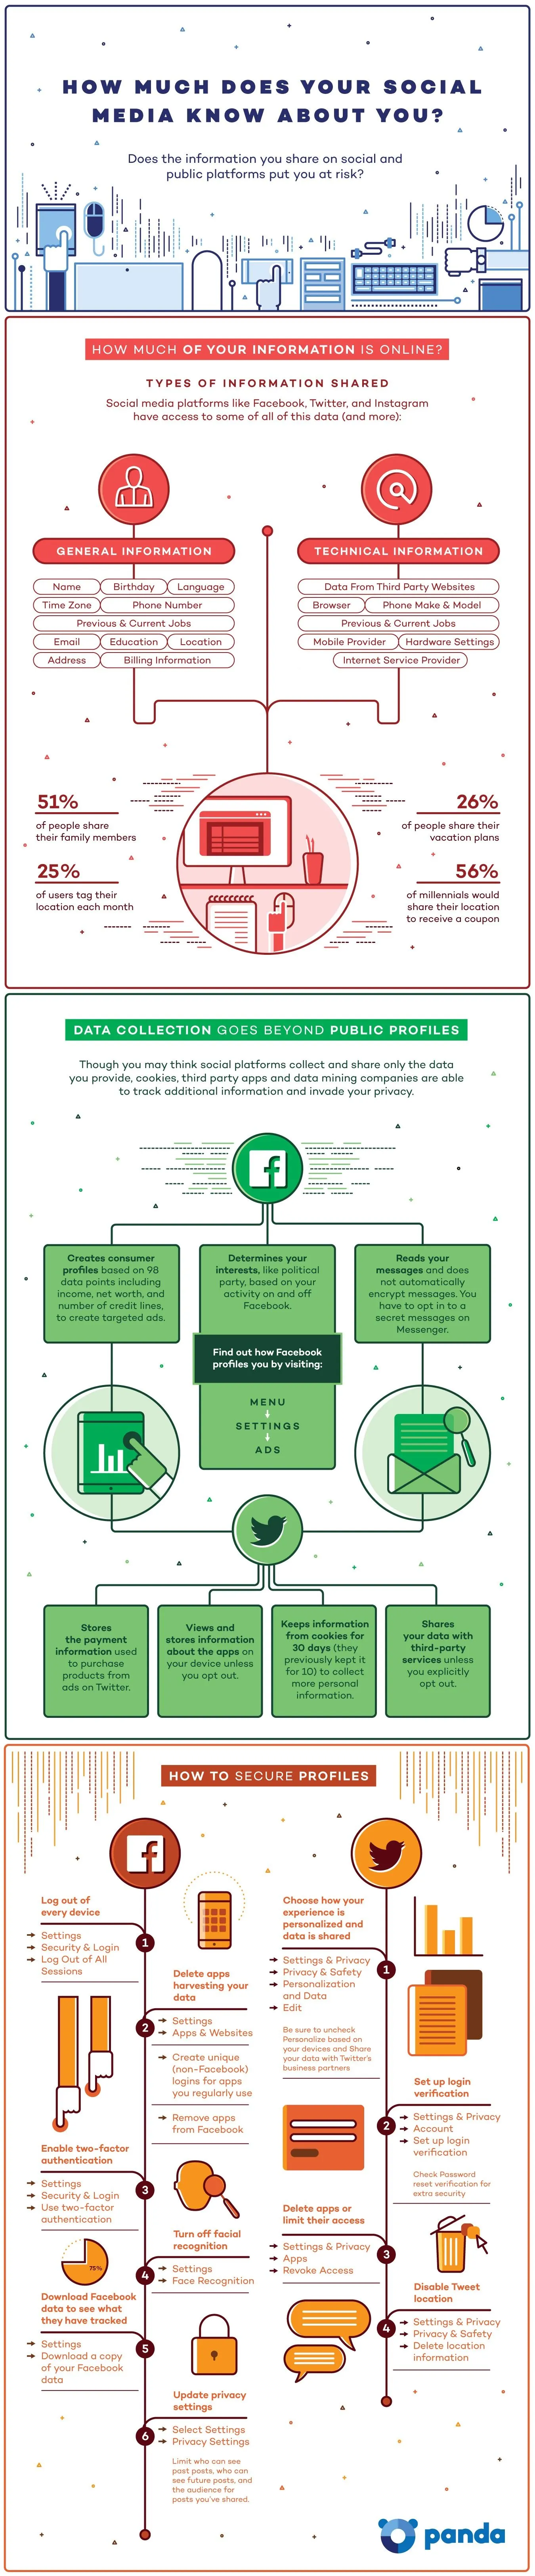 How Much Does Social Media Know About You - #infographic